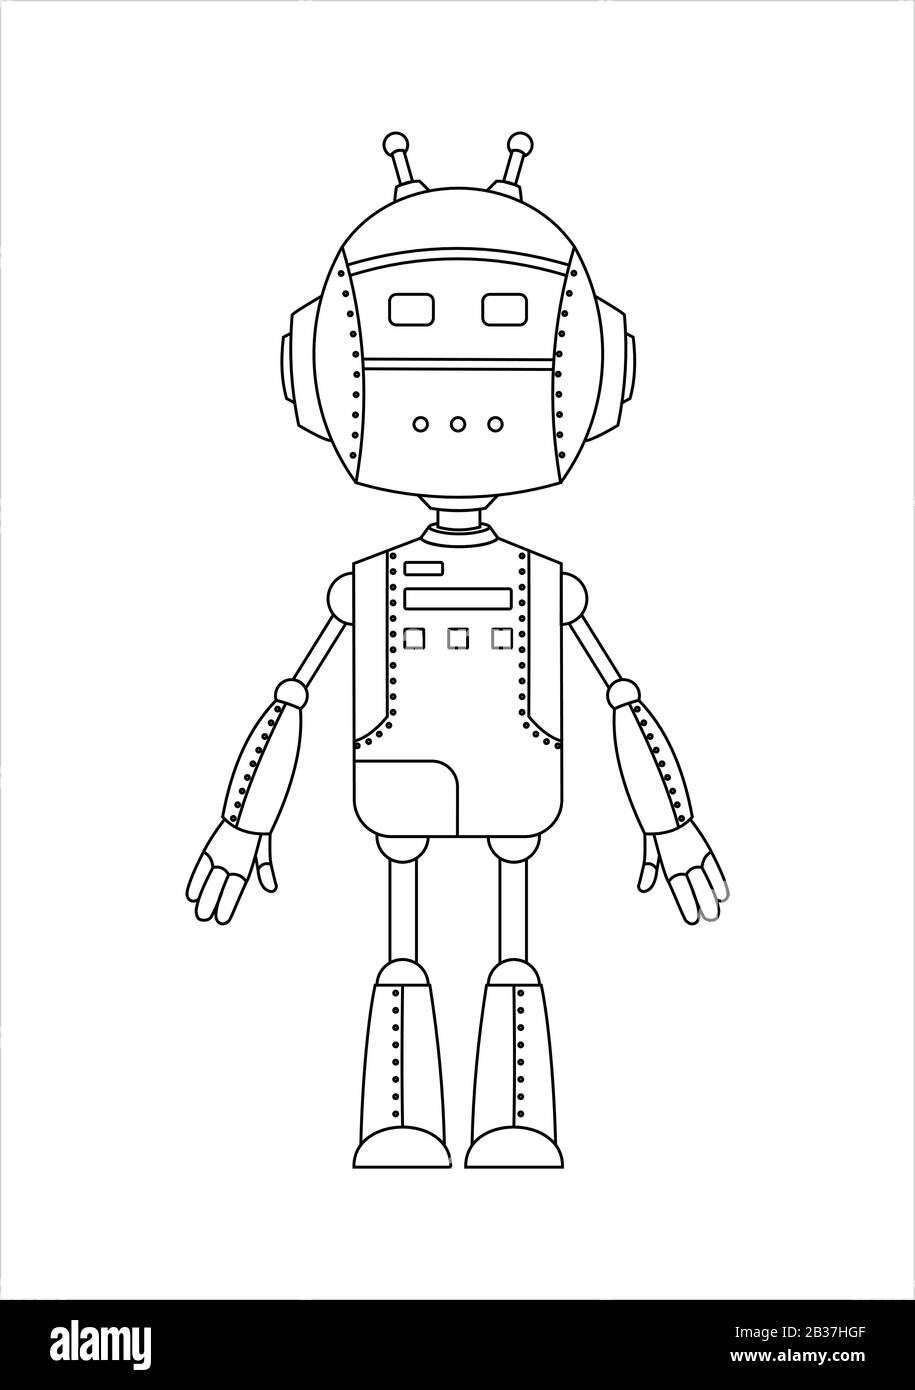 Android robot Black and White Stock Photos & Images - Alamy